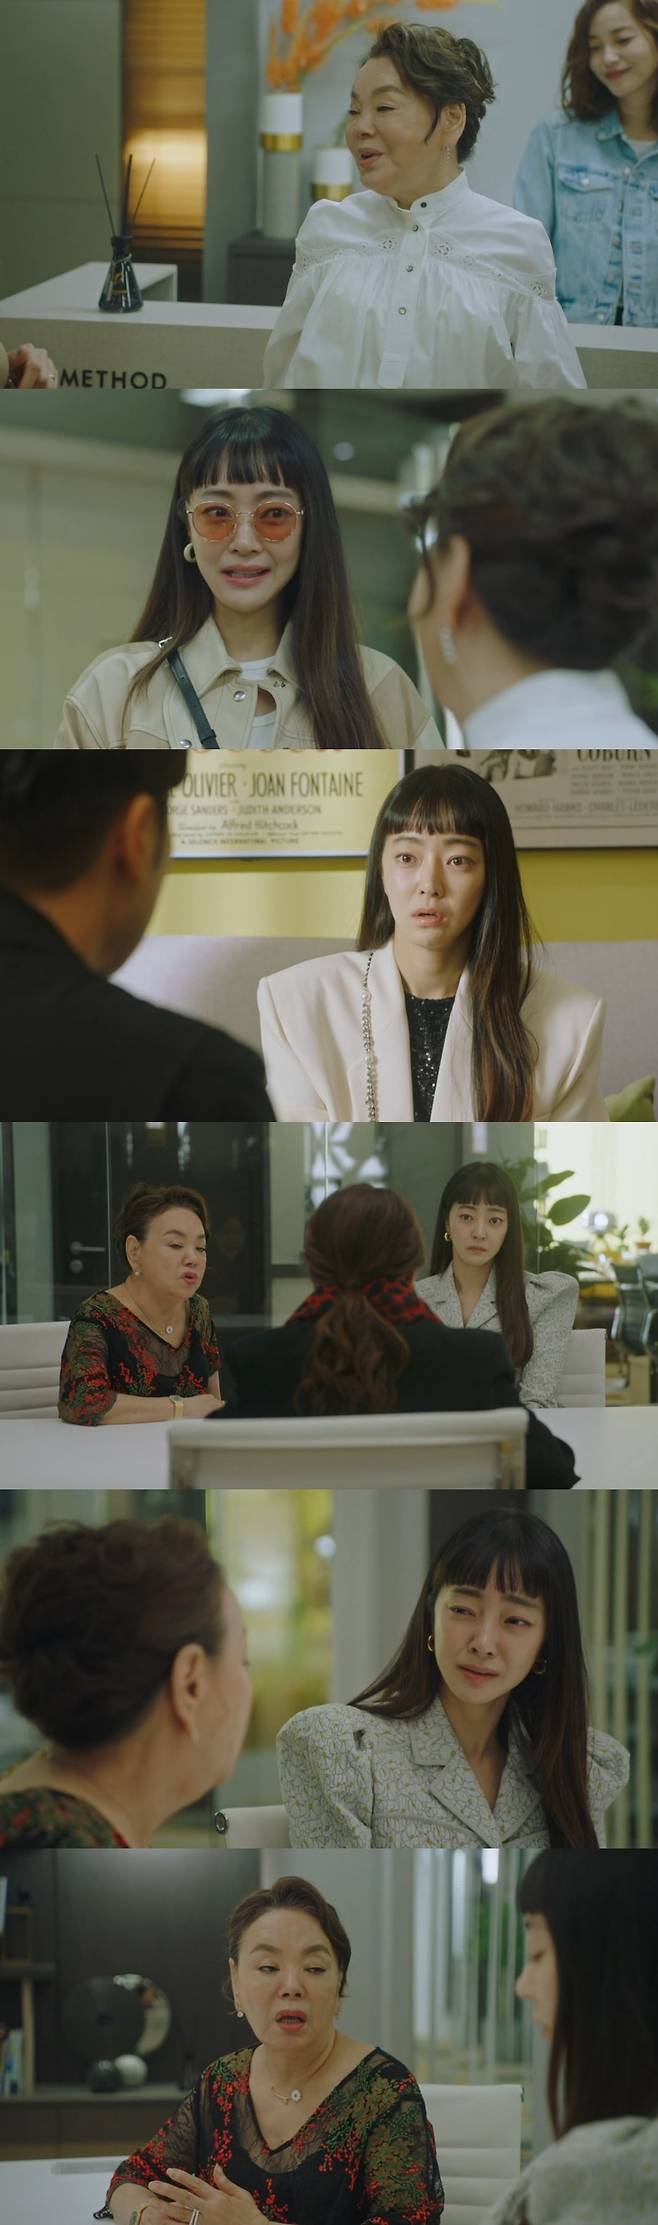 CelebritySidney Govou of Daughter-in-law Actor Kim Soo-mi X Seo Hyo-rim Explosion.In the third episode of TVN Monday drama  ⁇  Celebrity manager (playwright Park So Young, Lee Chan, Nam In Young / director Baek Seung Ryong) broadcasted on November 14, Kim Soo-mi and Seo Hyo-rim, who are actually Sidney Govou, .On this days show, two people are cast in a work. The two pretend to be good on the outside, but the fact that they have to stick together for several months during the filming process makes the two uncomfortable.Baro Casting to be canceled unexpectedly to perform various acts.Seo Hyo-rim seemed to be able to do it from the morning, but I can not do it because of my mothers face.My mom watched everything I wore and what I wore, and said, How much did you buy it?  ⁇  My head hurts when I think about shooting for six months. Kim Soo-mi said that acting was inconvenient.He also said, Thank you for praising me, but it seems to be stabbing my side. I also stressed that I was nervous because I was checking whether the food was uploaded to the SNS or not.However, Kim Soo-mi did not support him, and he was angry that he was pissed off even if he praised him.Seo Hyo-rim said, I do not want to eat it honestly. Kim Soo-mi screamed, Do not you eat it?Kim Soo-mi, however, said, What is hypocrisy?He retorted that he really meant it.Seo Hyo-rim said, My mother is not selfish, but I am burdened. It is because I am not enough. Before marriage, I was Actor Seo Hyo-rim, but now Kim Soo-mi Daughter-in-law.I want to be an actor Seo Hyo-rim, but I think Im not enough.When Seo Hyo-rim apologized, Im just not good enough. Kim Soo-mi made a face that understood Seo Hyo-rim as the same actor. Hes not good enough. Its still far.If you do not want to stick with me and think about doing well, I advise you not to think about it.The writer who watched them was jealous of Daughter-in-law and Daughter-in-laws youthfulness and possibility, saying that Kim Soo-mi was qualified as Hyorim.This drama is really going to be a big hit. Kim Soo-mi caught his hair by saying that this is not method acting.After finishing the fight with the artist, Kim Soo-mi finally took a look at Seo Hyo-rim by presenting a challenge to Seo Hyo-rim.On the other hand, the drama Surviving as a Celebrity Manager is adding to the fun because the actual stars are about to make an episode cameo every time.